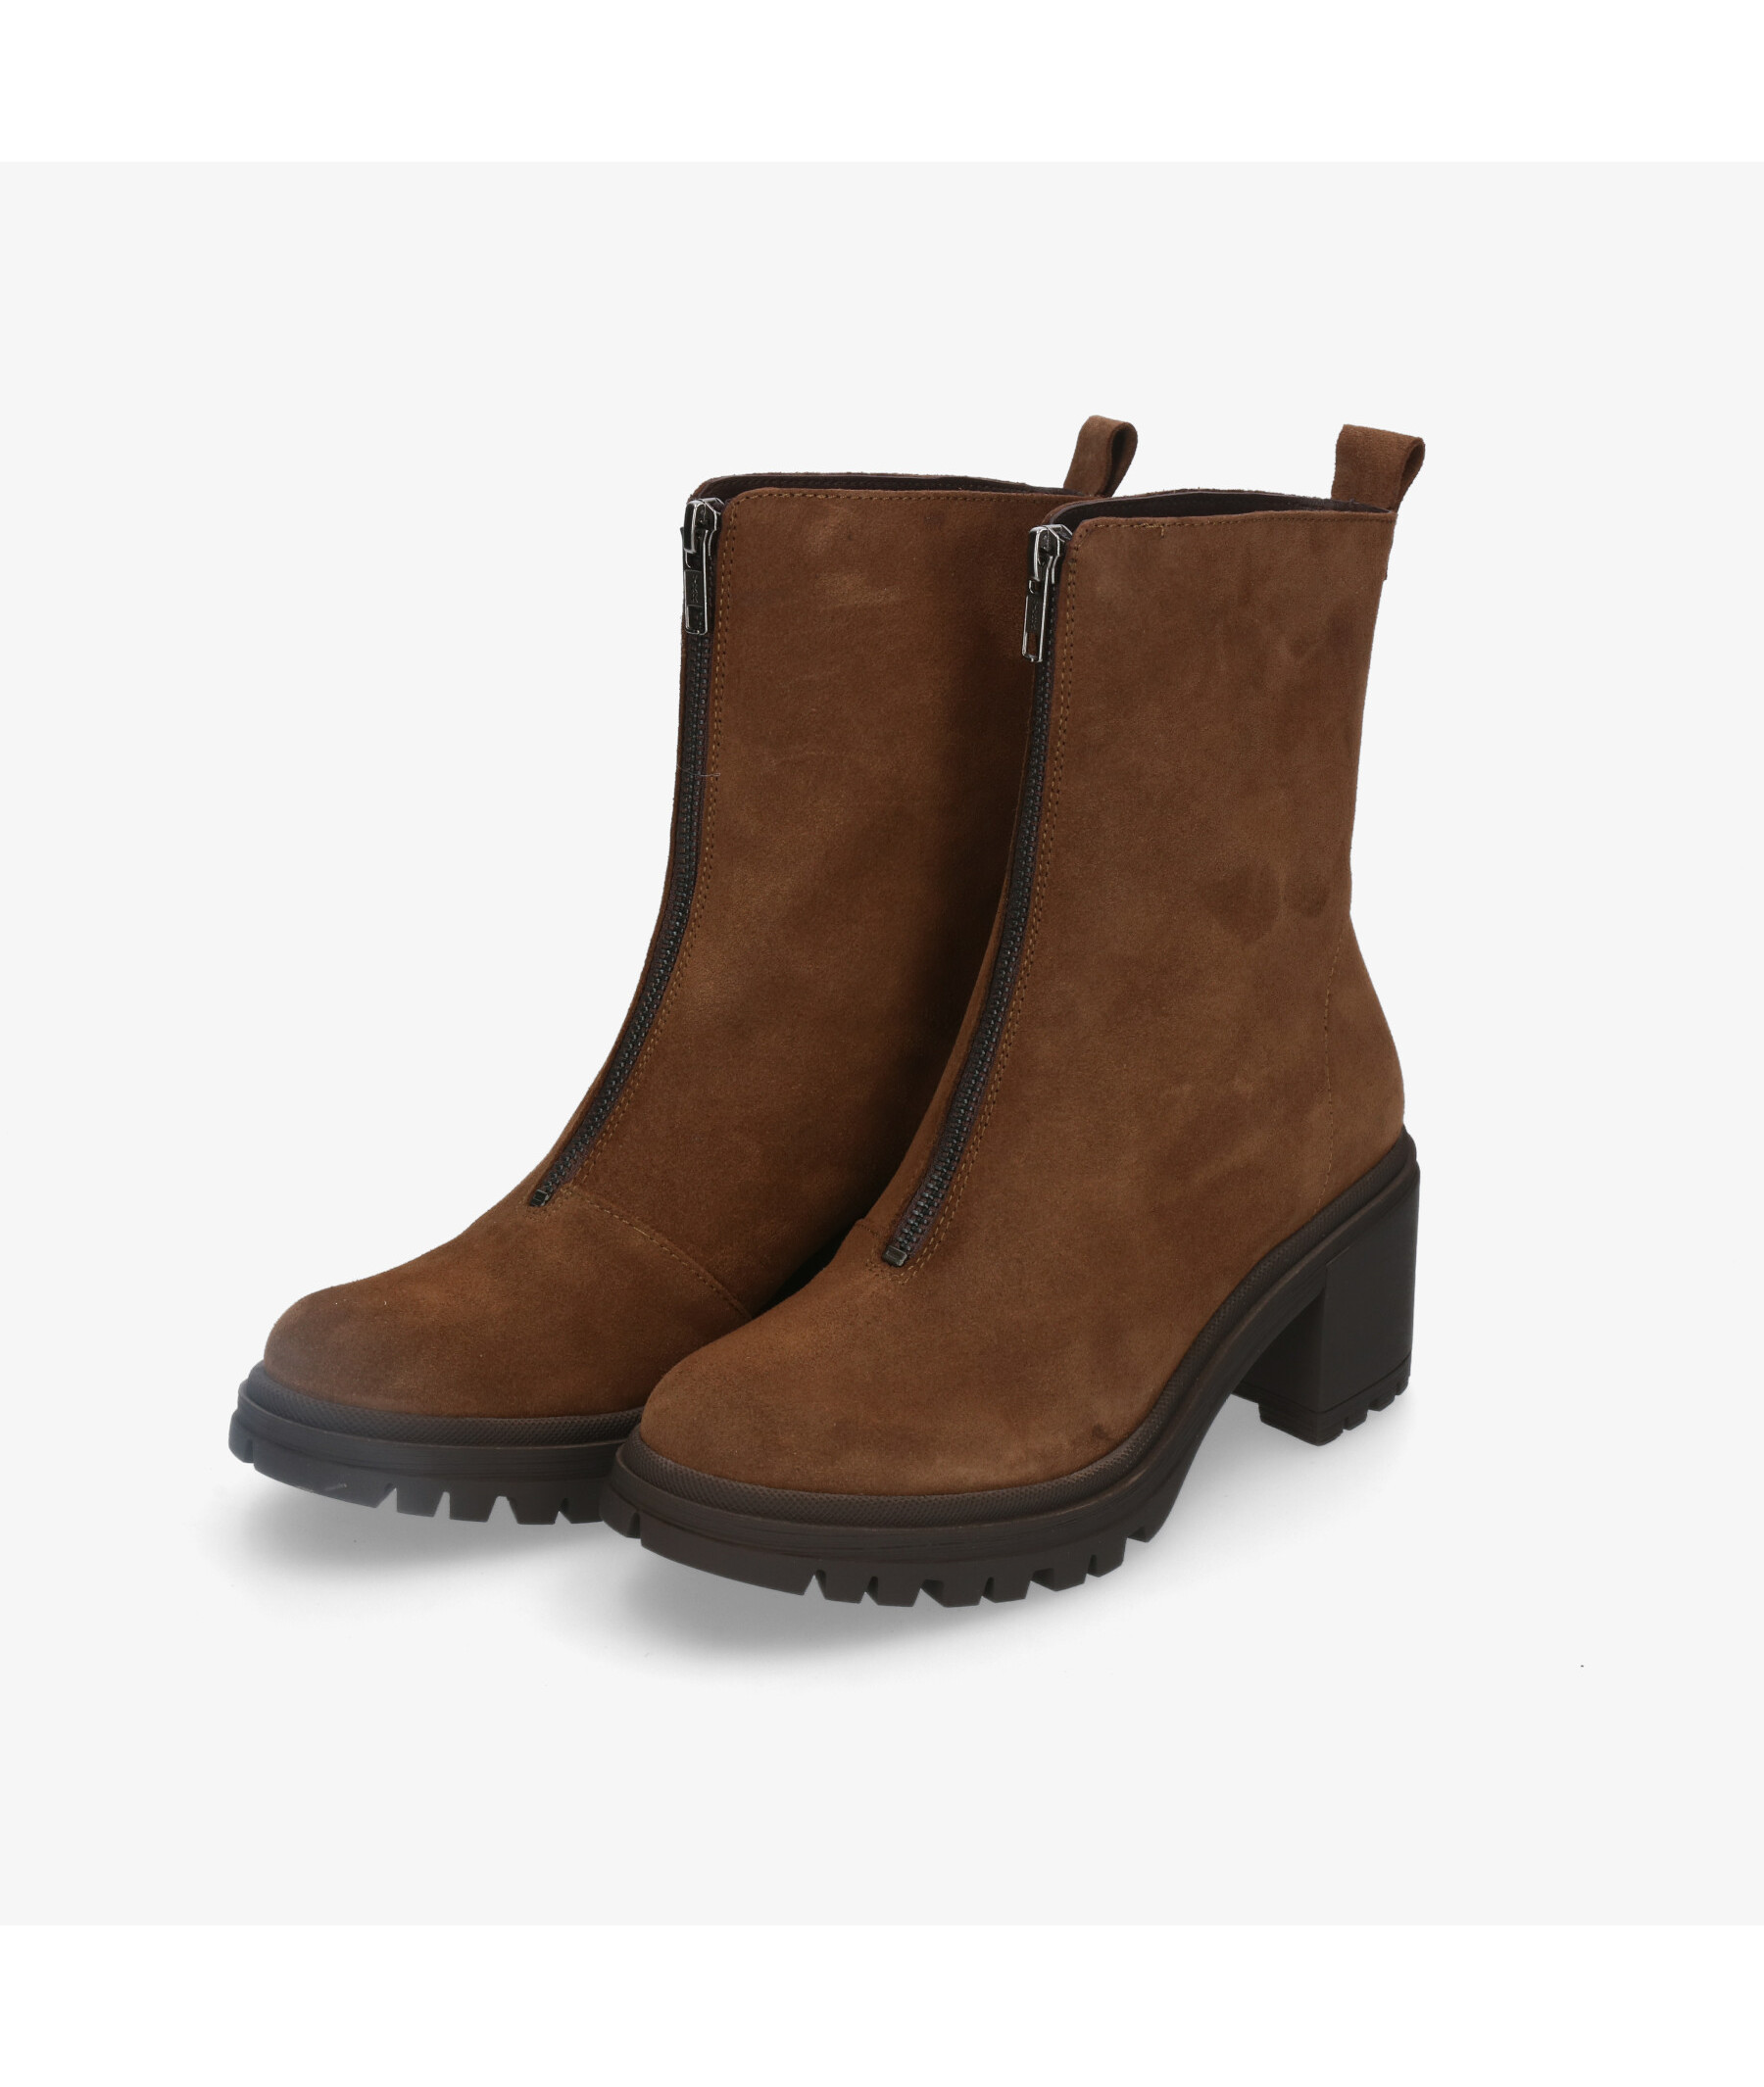 Milla Suede Boot, Open Ankle Boots